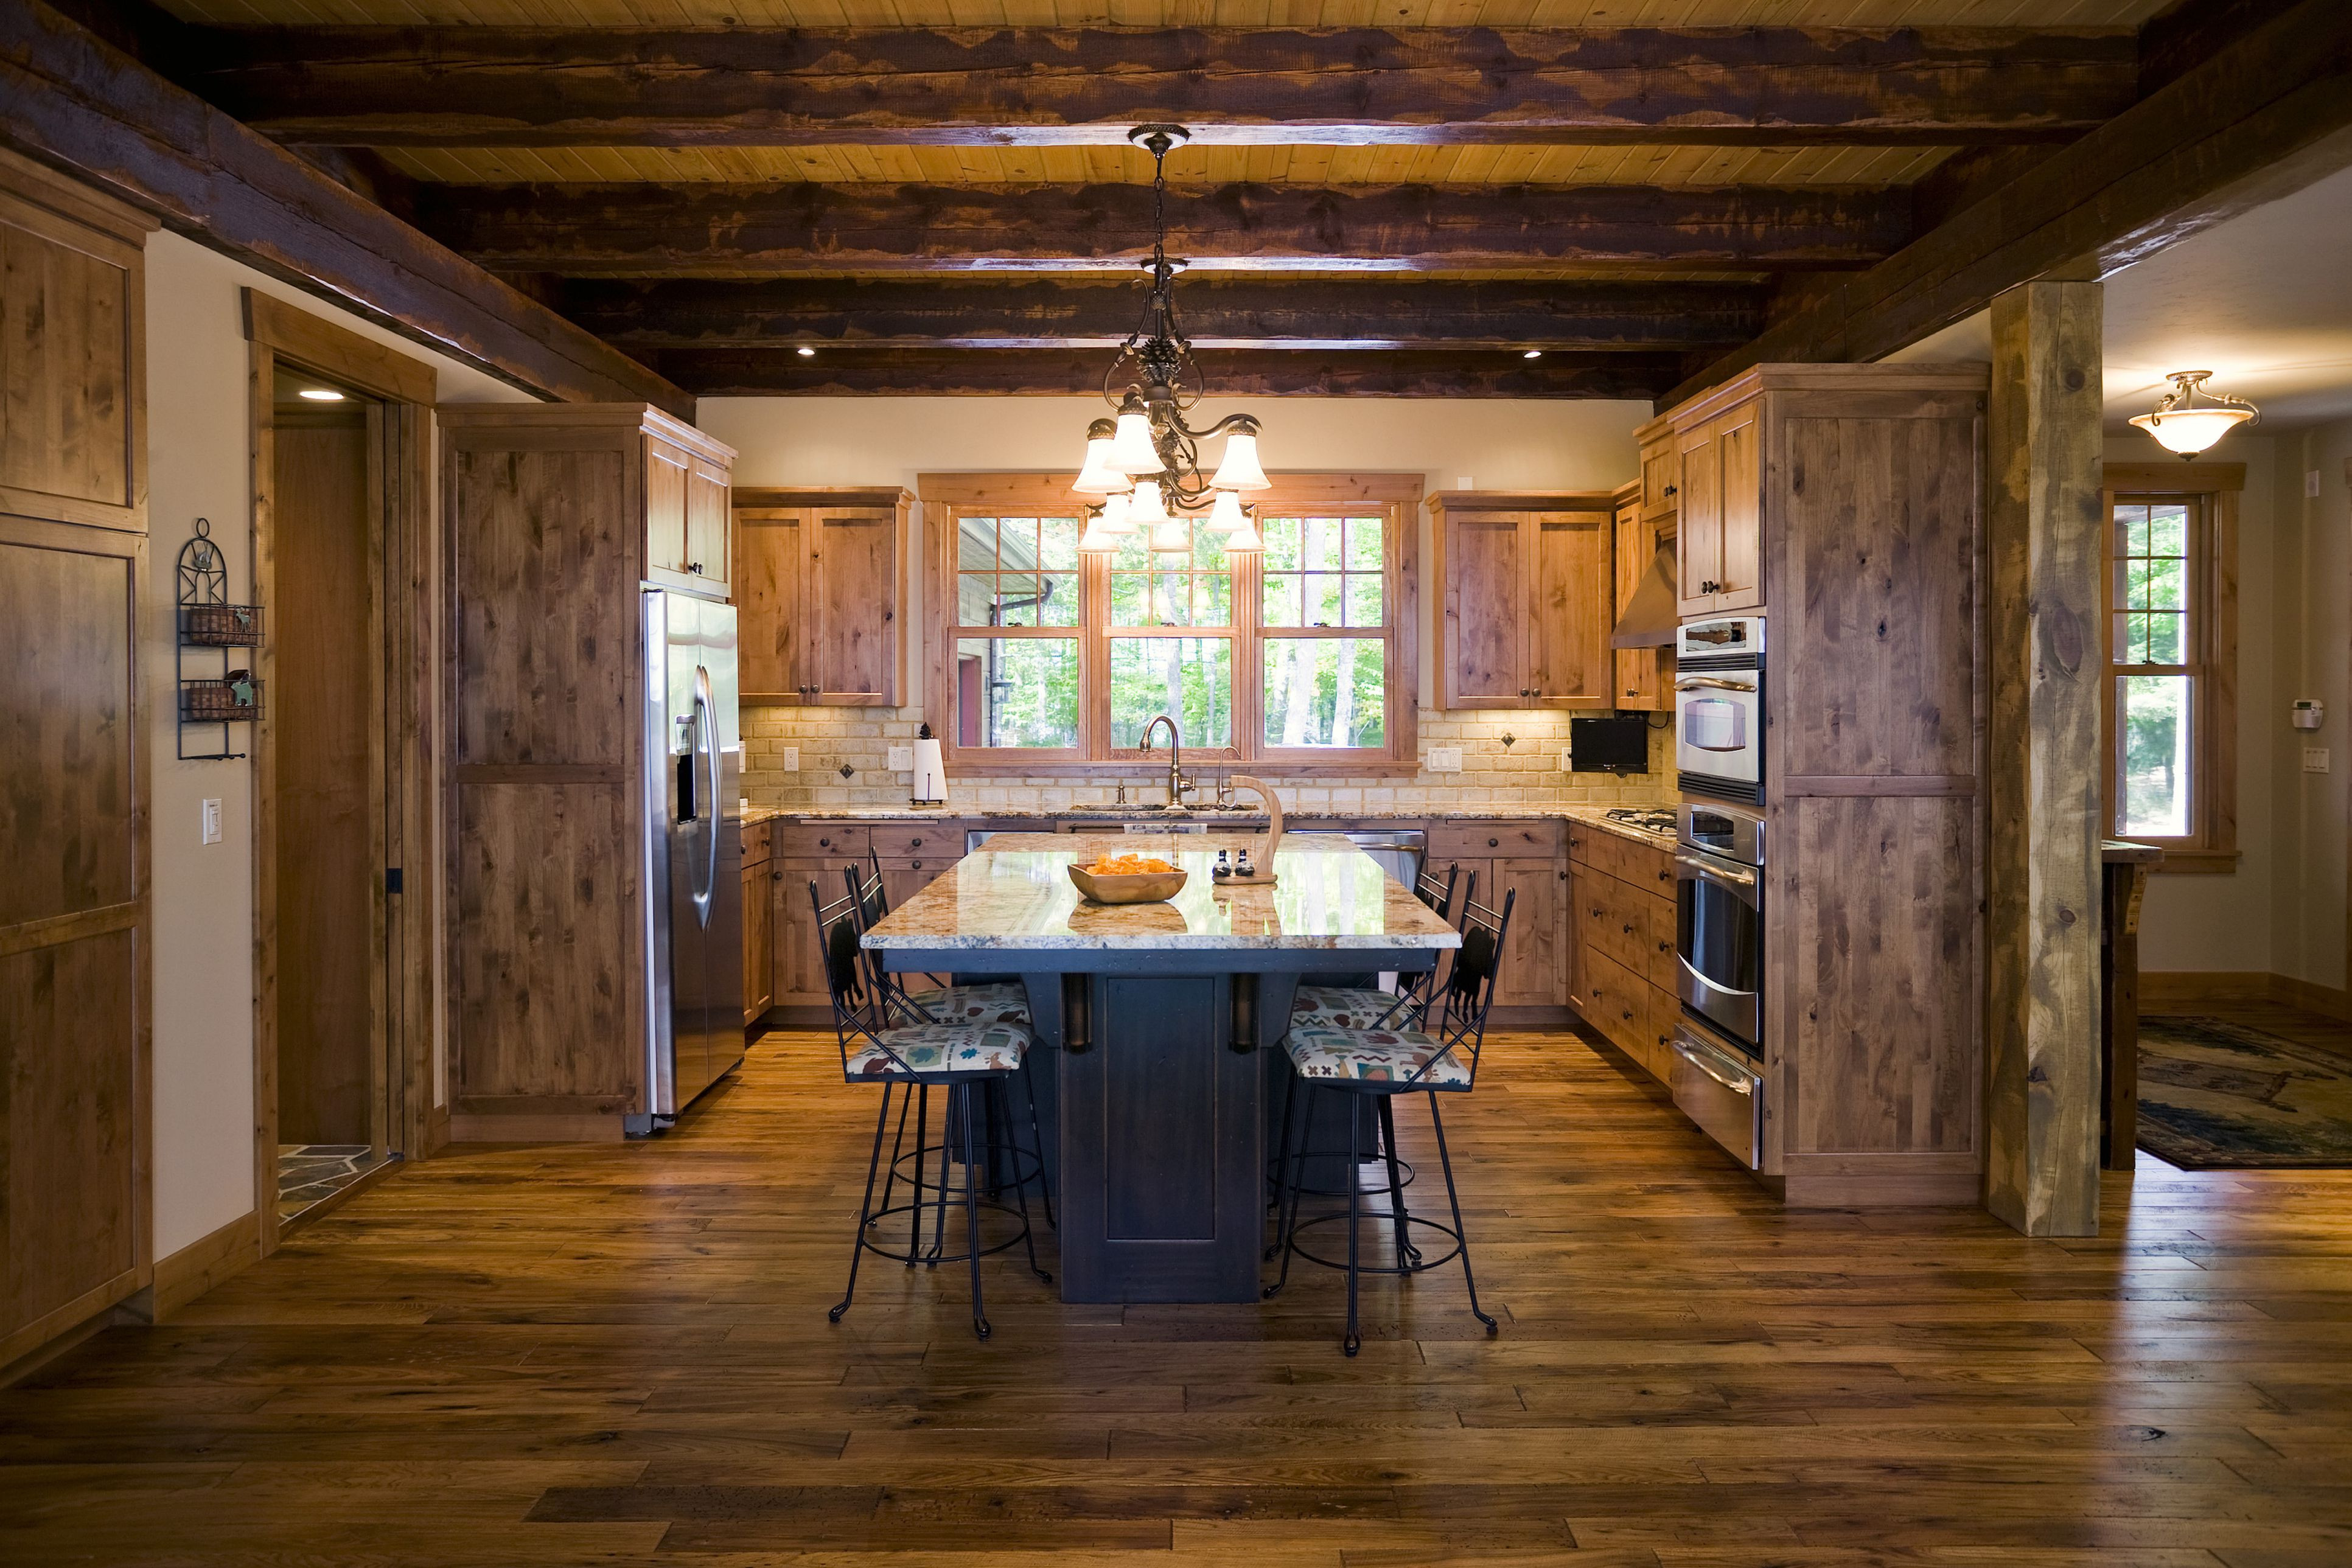 hardwood floor cleaning buffalo ny of country or rustic kitchen design ideas regarding kitchen with wood floor and open wood beam ceiling 88801427 image studios 56a4a1615f9b58b7d0d7e63f